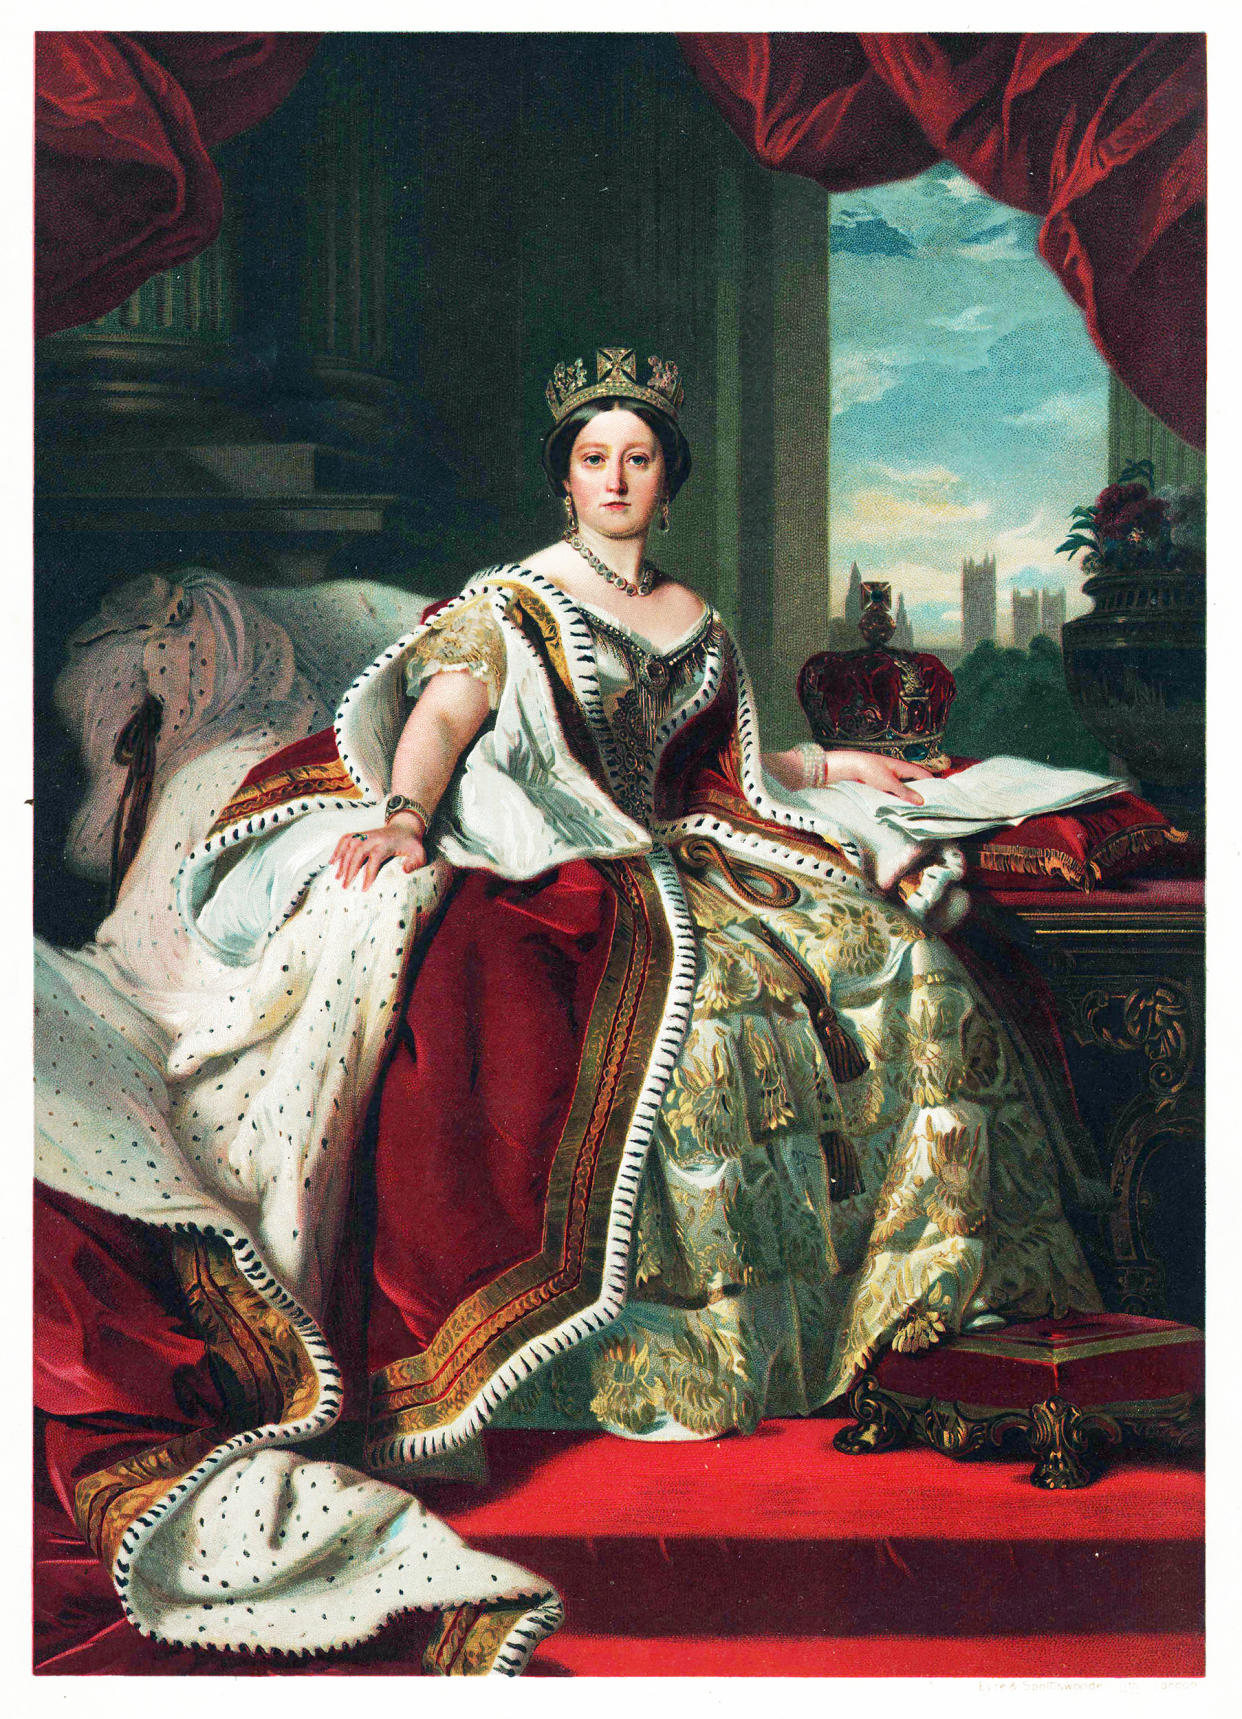 A painting by F. Wintermalter of a young Queen Victoria, c.1850. (Transcendental Graphics / Getty Images)